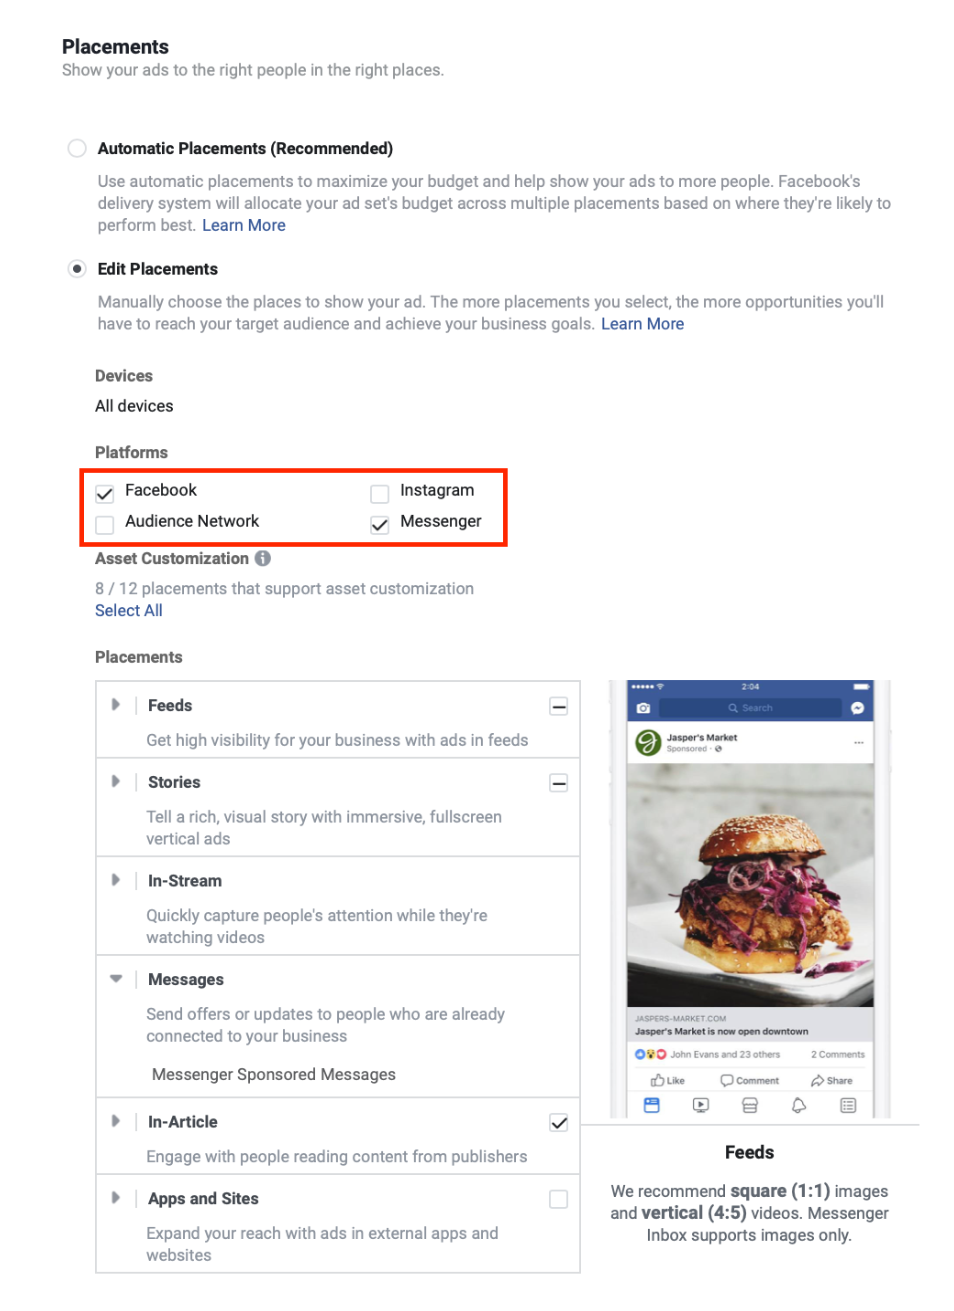 Facebook Advertising - Edit Placements